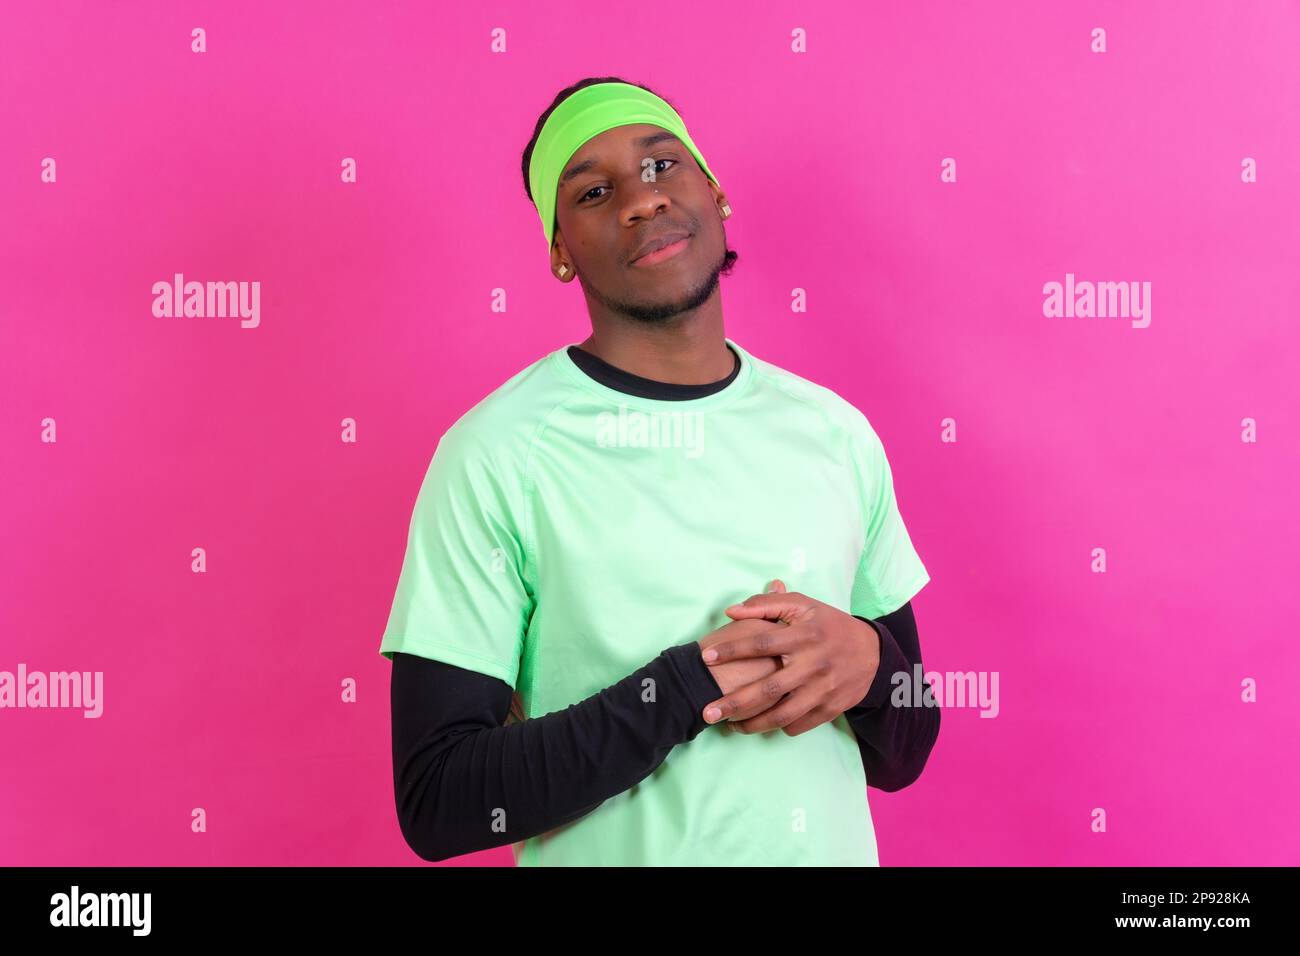 Black ethnic man in green clothes on a pink background, concept portrait Stock Photo